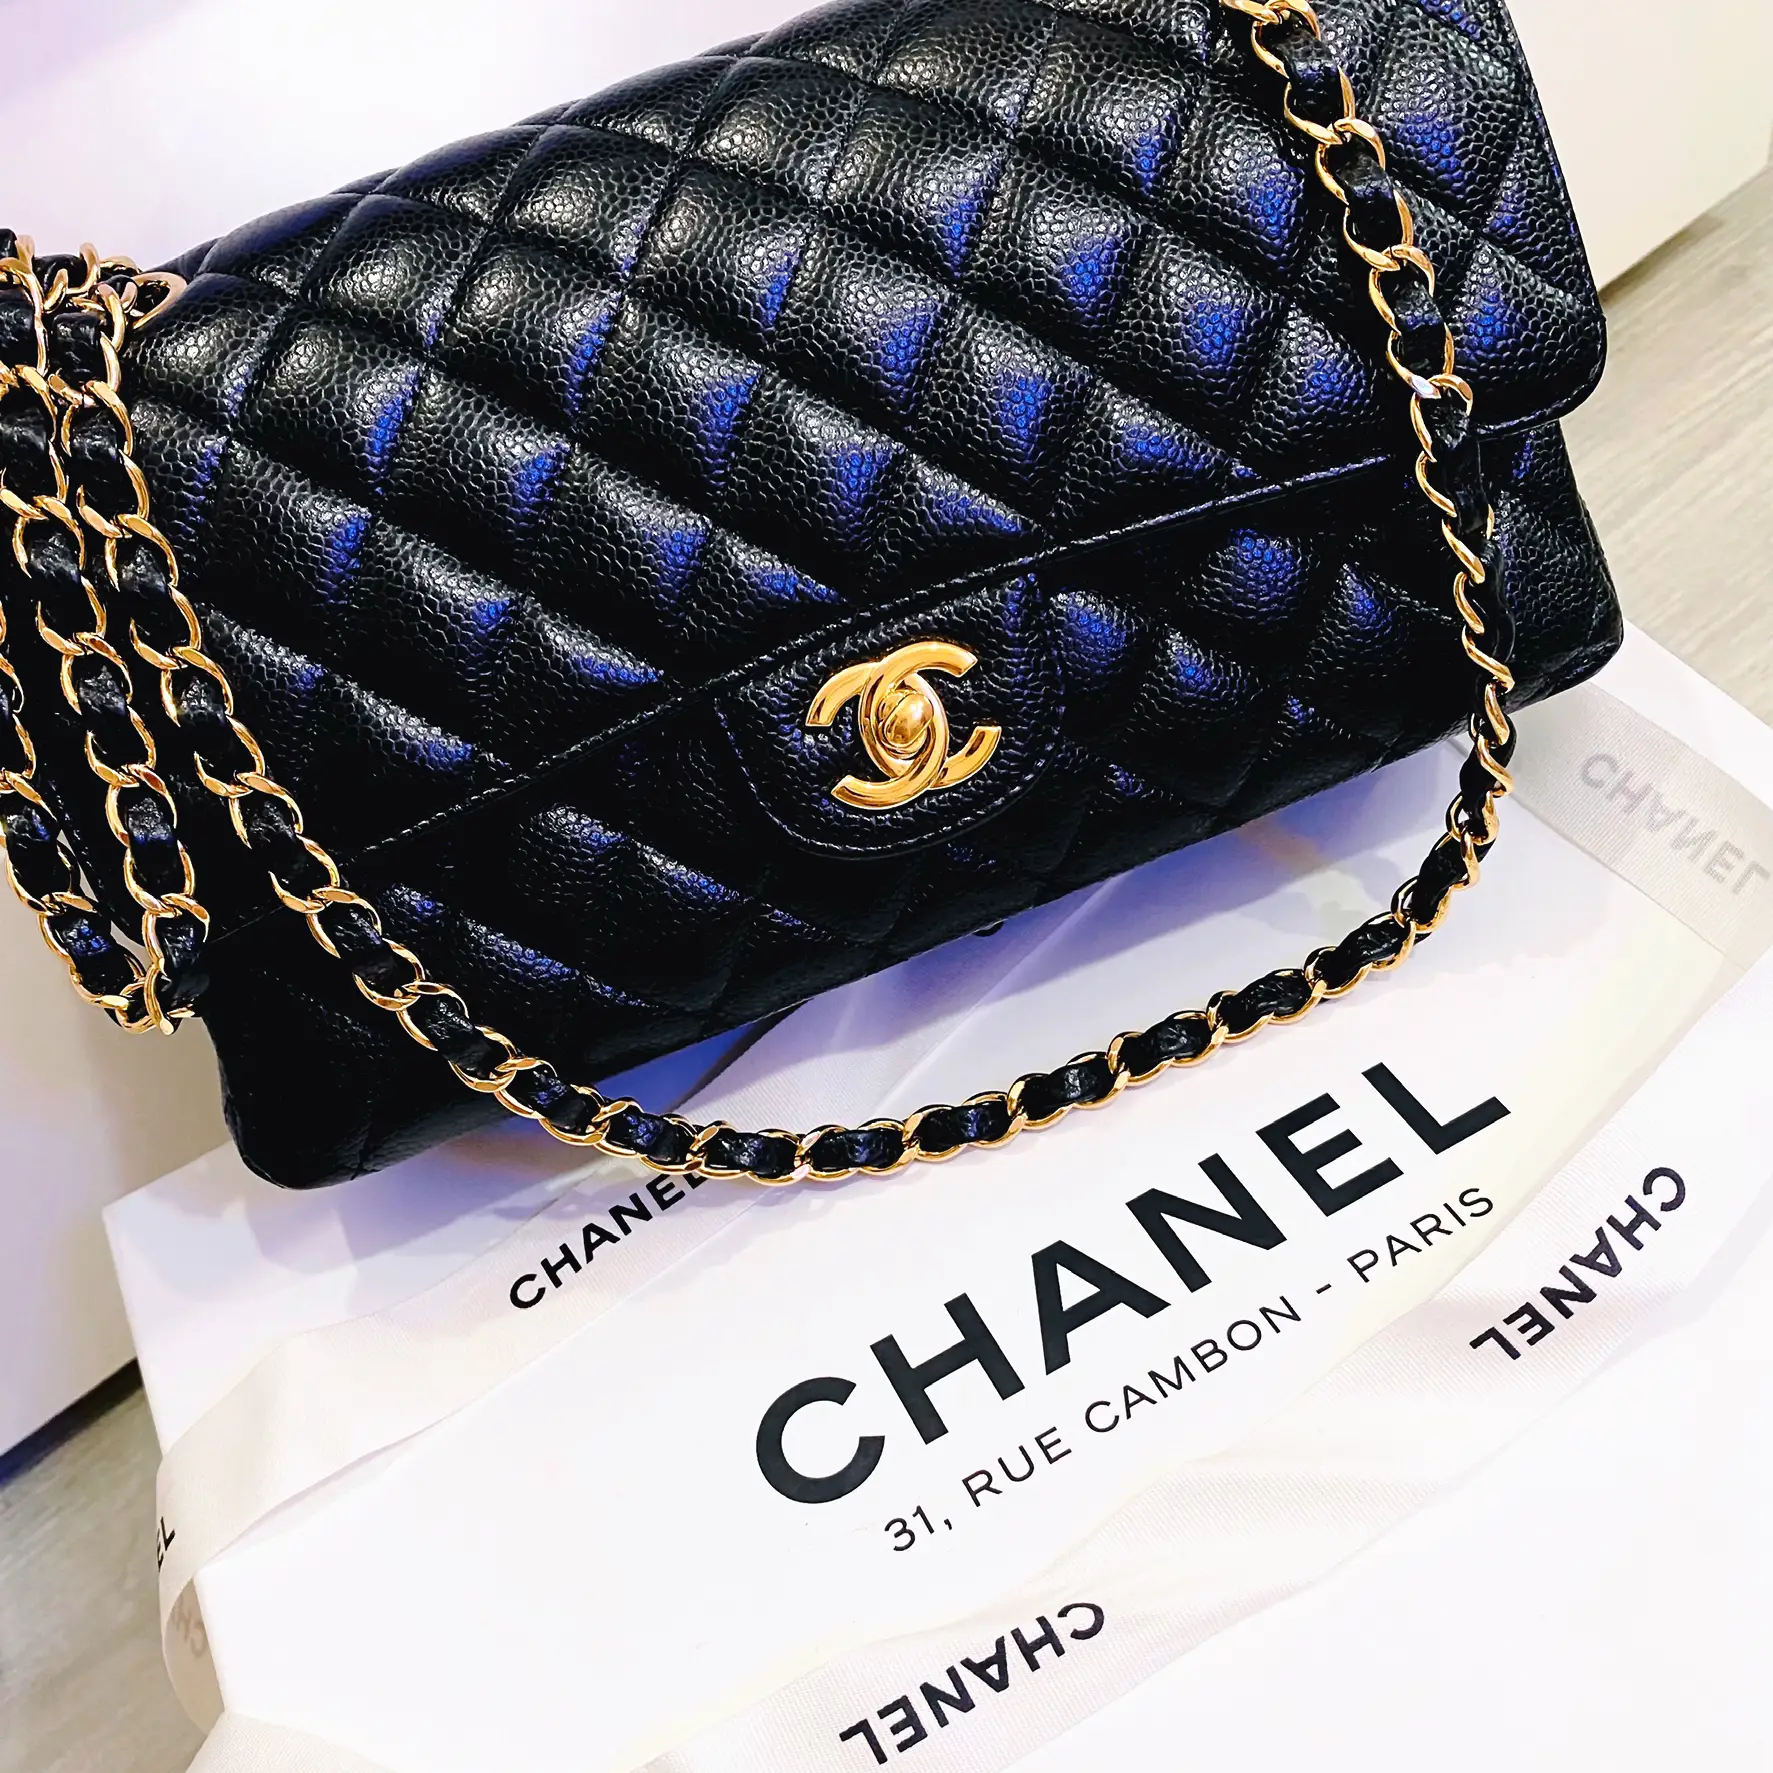 Chanel Classic Flap, Small or Medium?, Gallery posted by ✈️💙